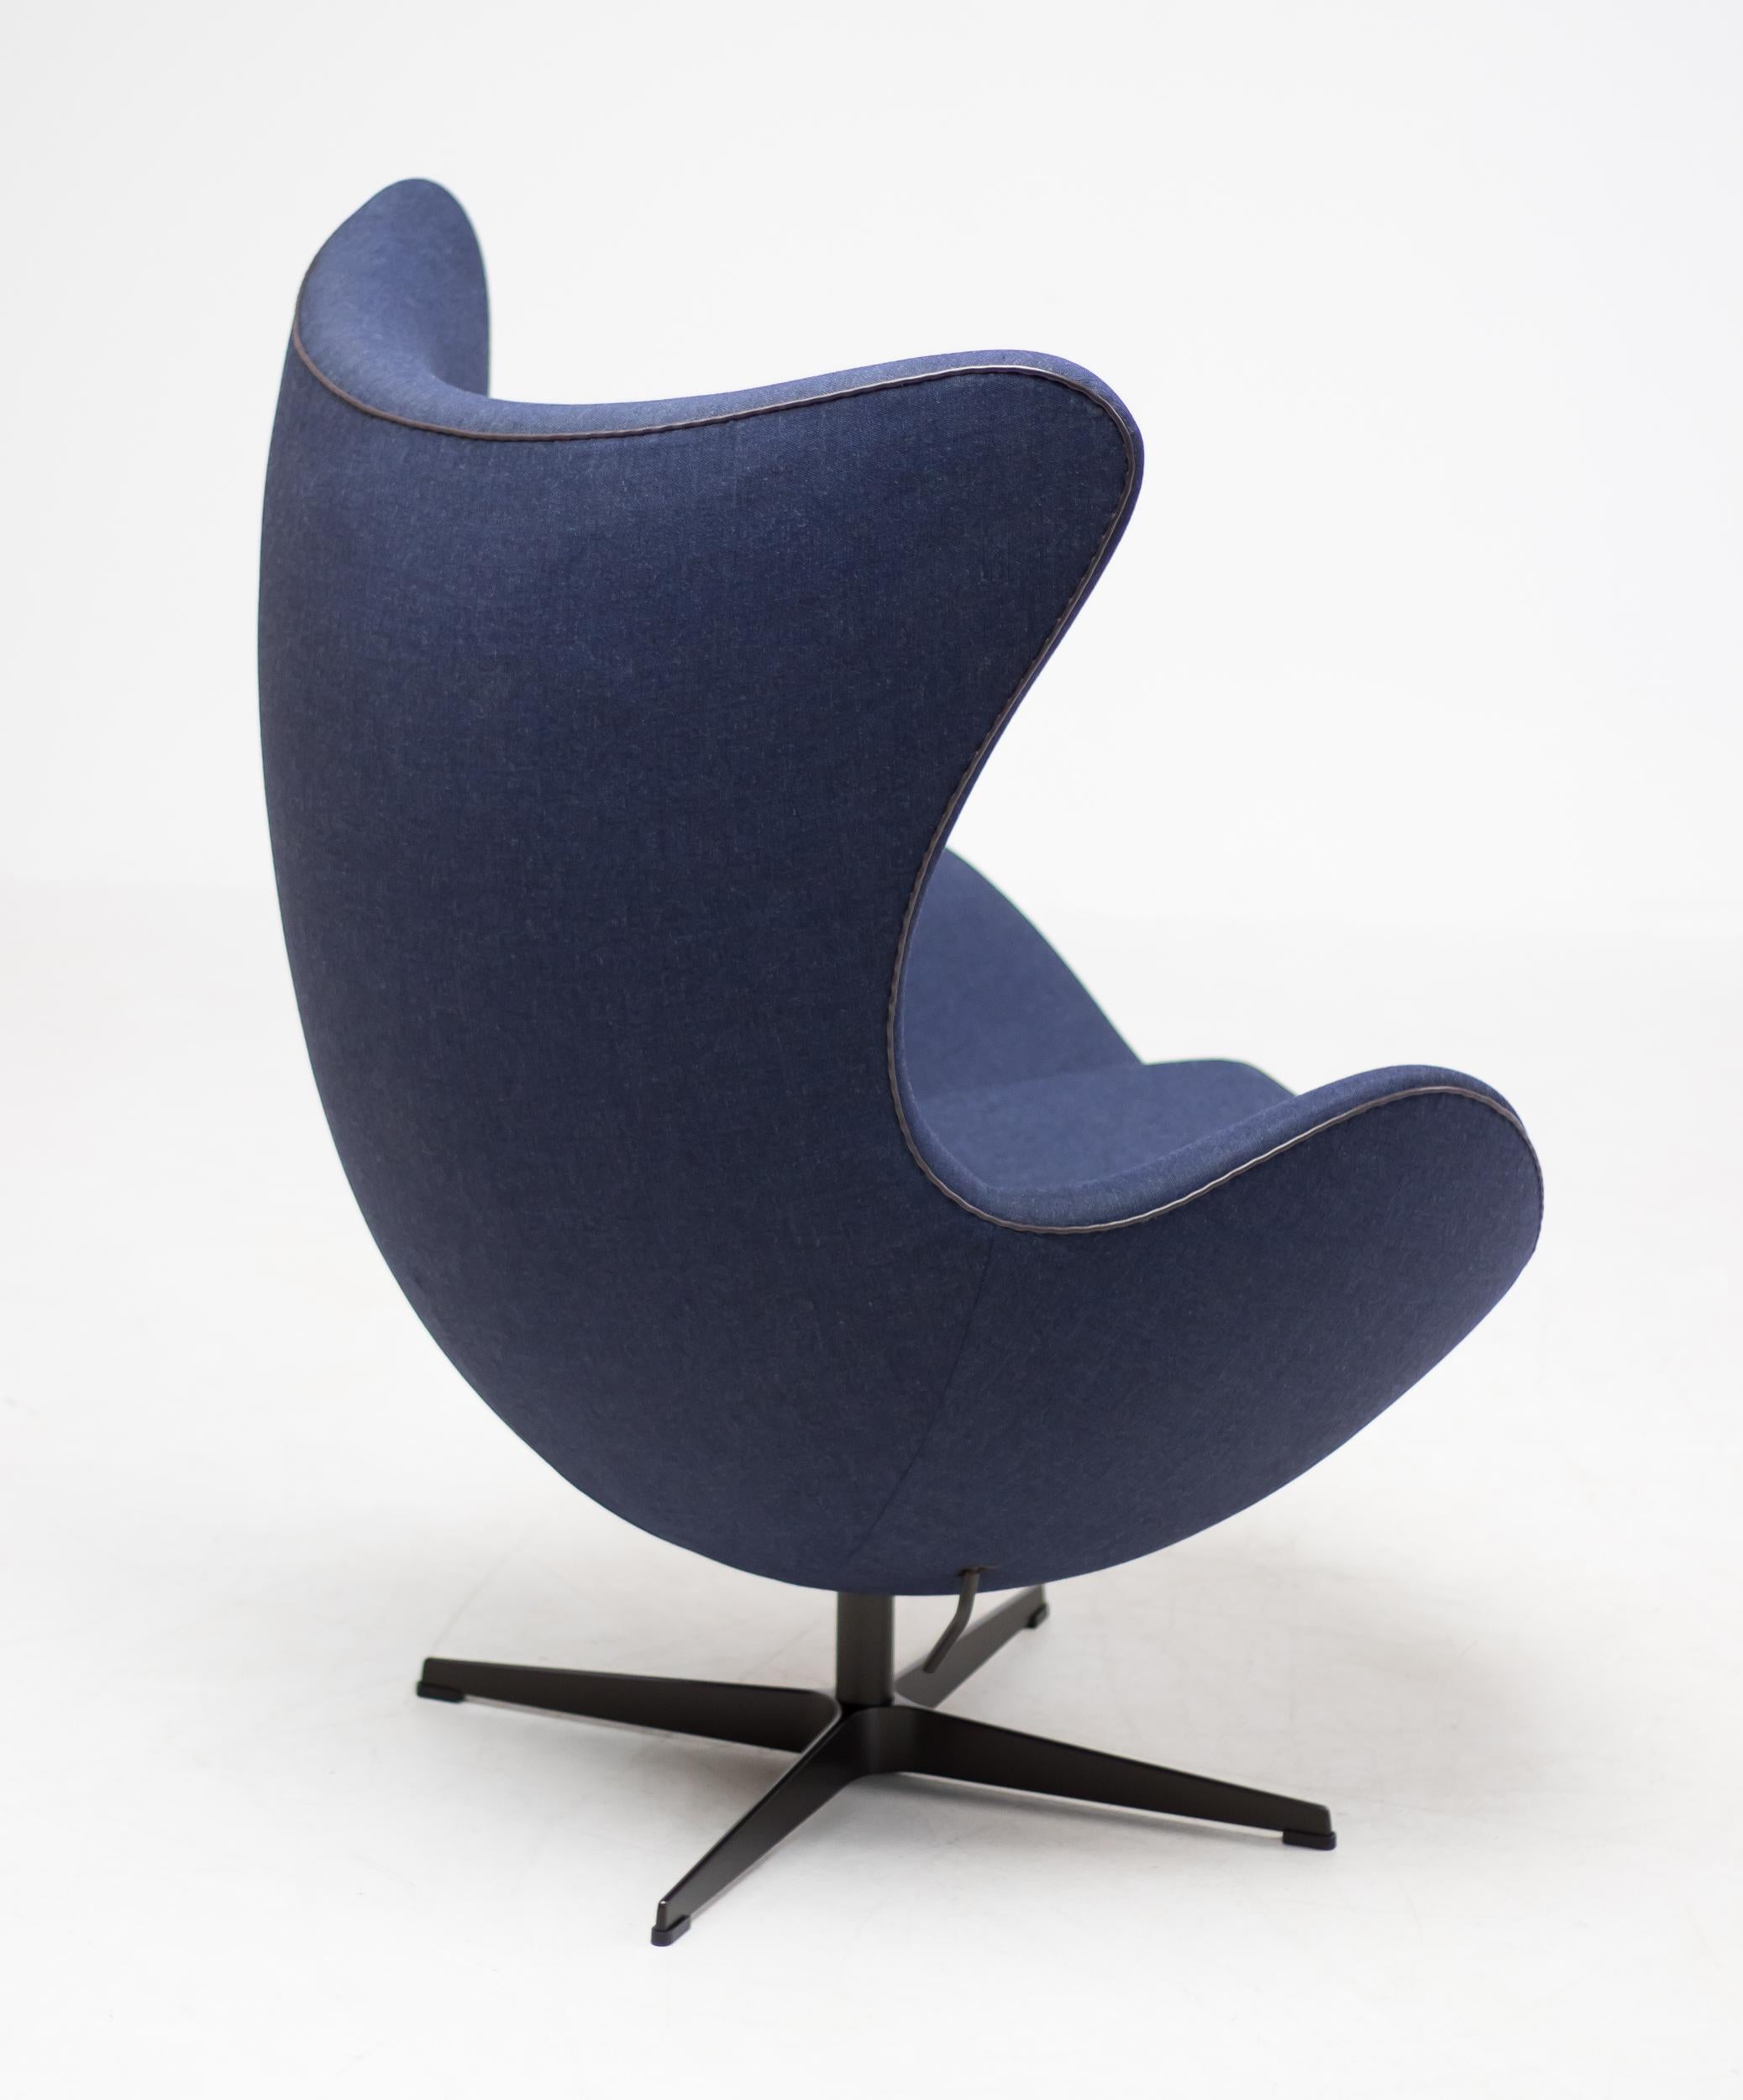 Contemporary Limited Edition Blue Canvas Egg Chair by Arne Jacobsen